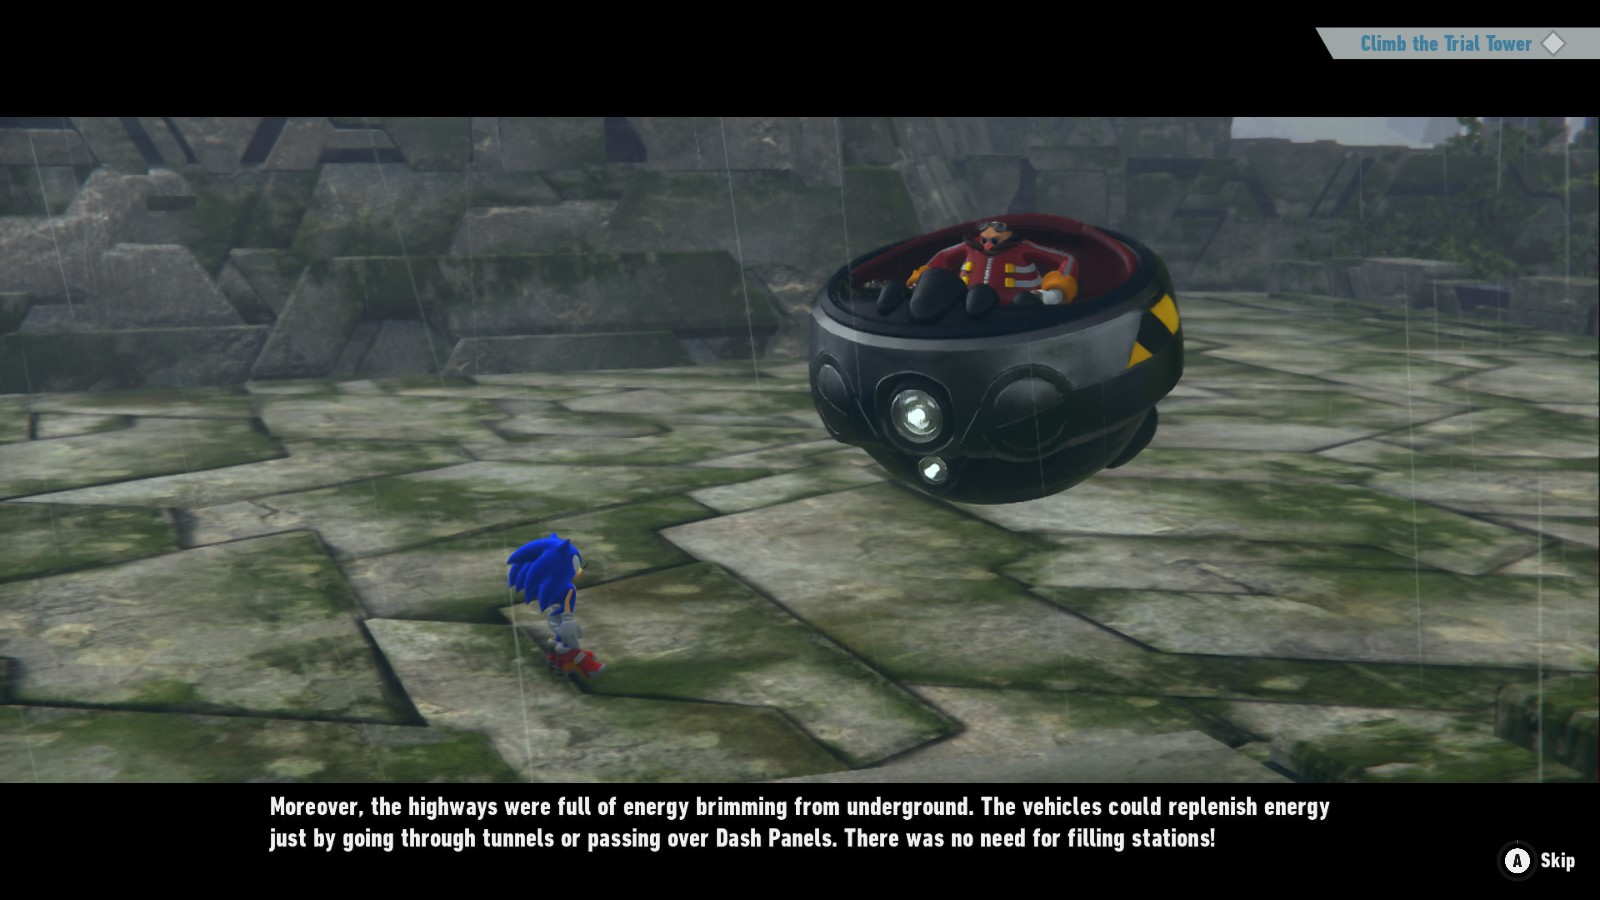 A screenshot of Sonic Frontiers. Eggman in his Eggmobile is talking to Sonic while in some ruins. The subtitle below reads: "Moreover, the highways were full of energy brimming from the underground. The vehicles could replenish energy just by going through tunnels or passing over Dash Panels. There was no need for filling stations!"